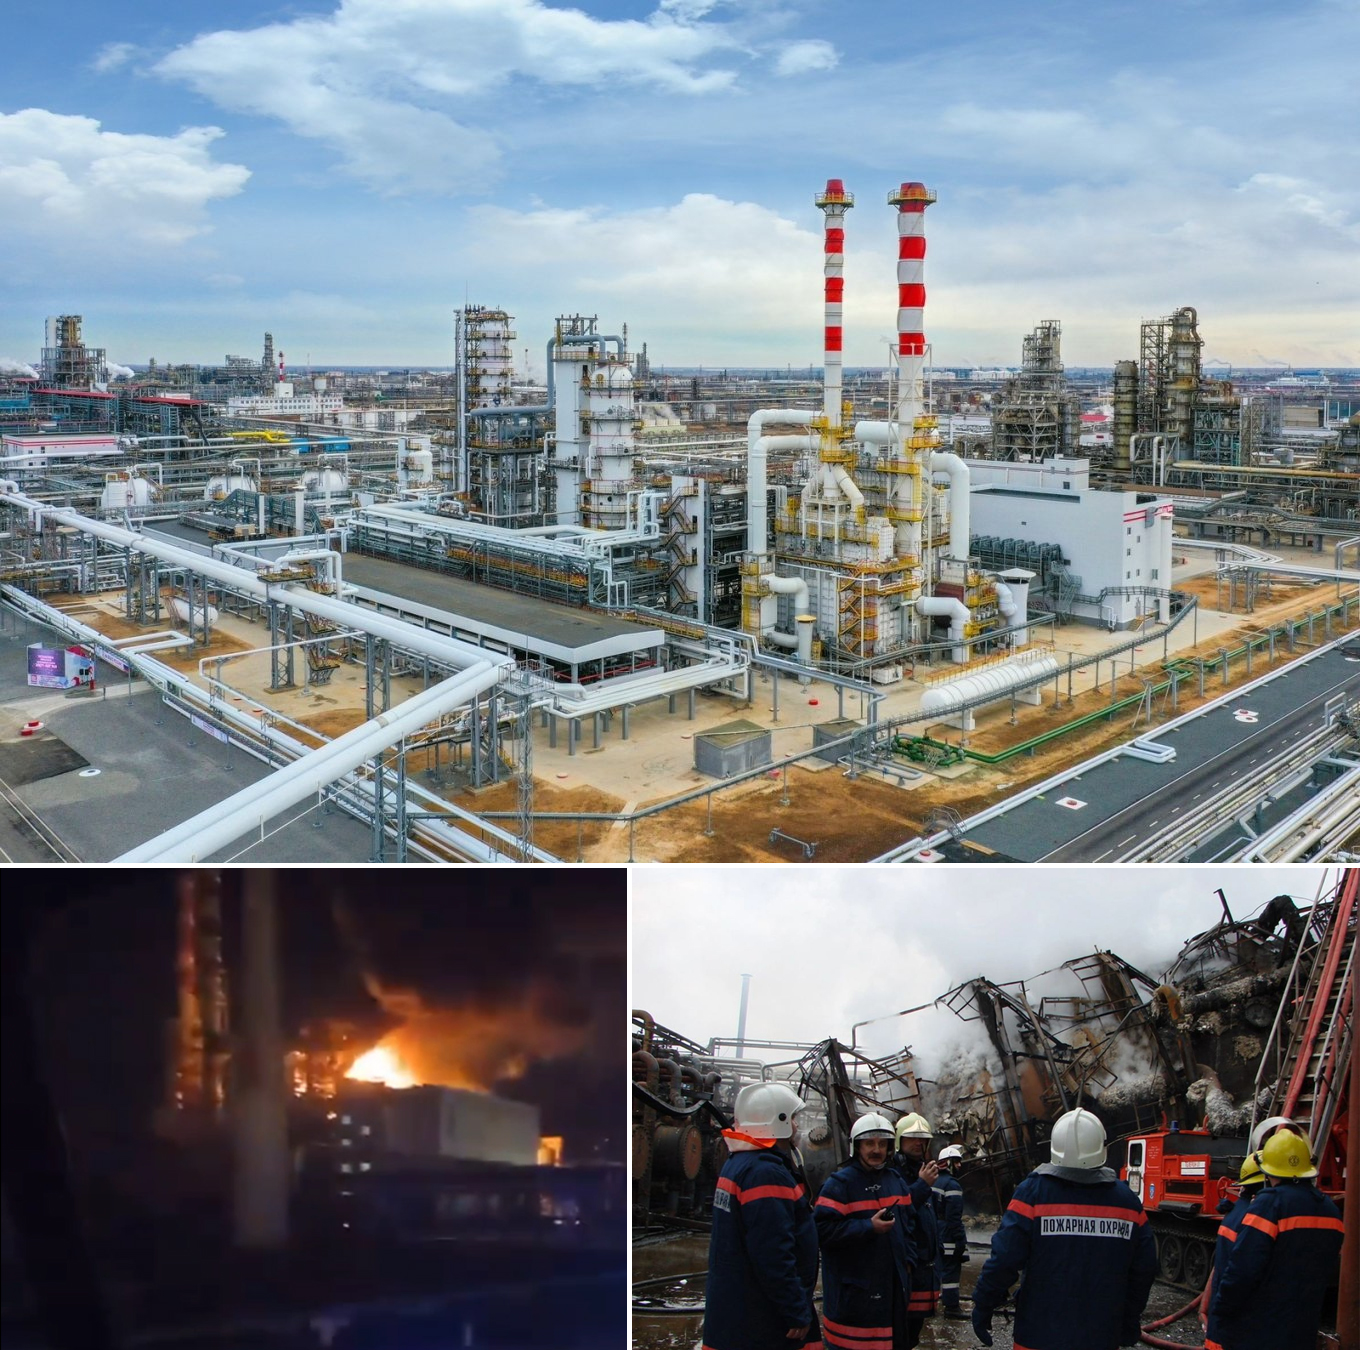 How Much russia is Losing Due to Ukrainian Strikes on Oil Refineries, ELOU-AVT-5 primary oil processing facility of the Volgograd Oil Refinery before and after Ukraine’s drones strike, Defense Express